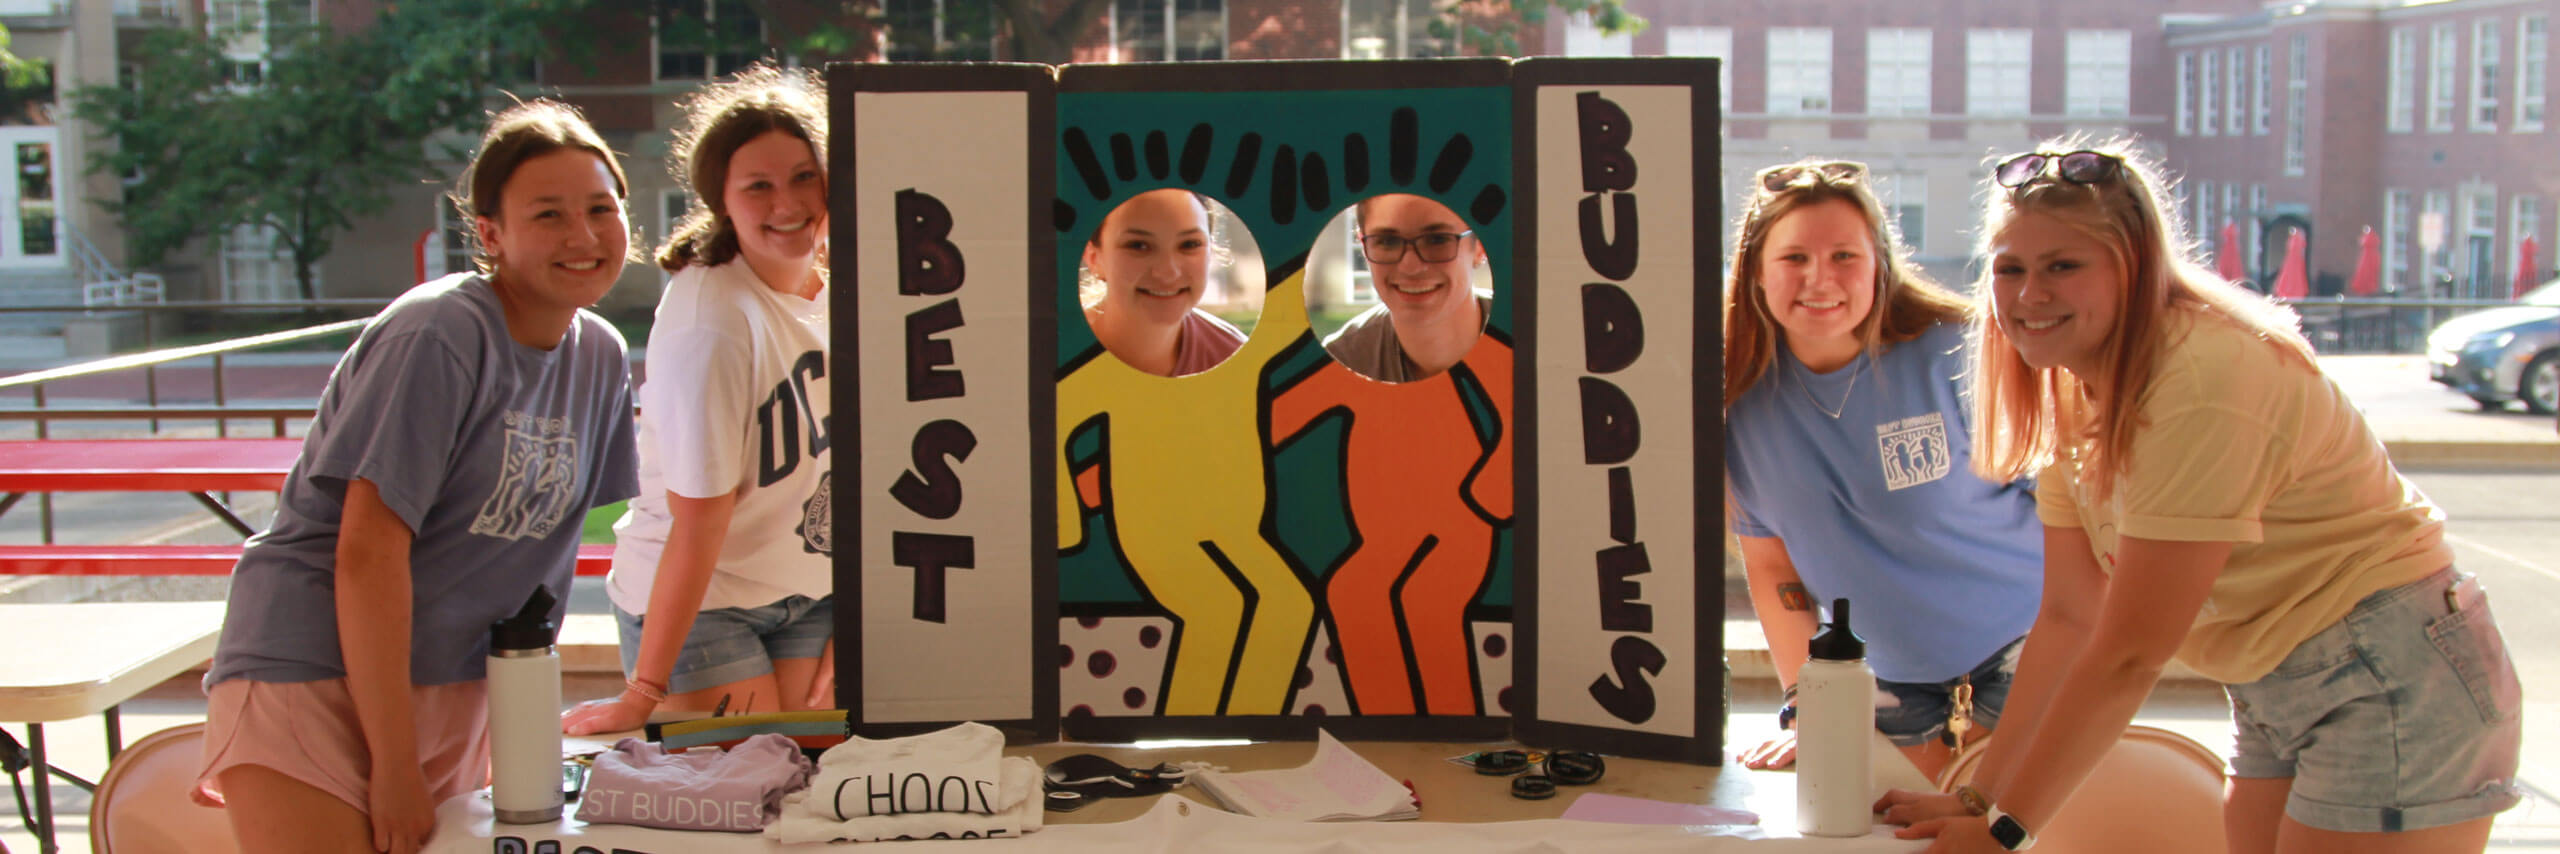 Students posing together at a Best Buddies RSO booth at an event.